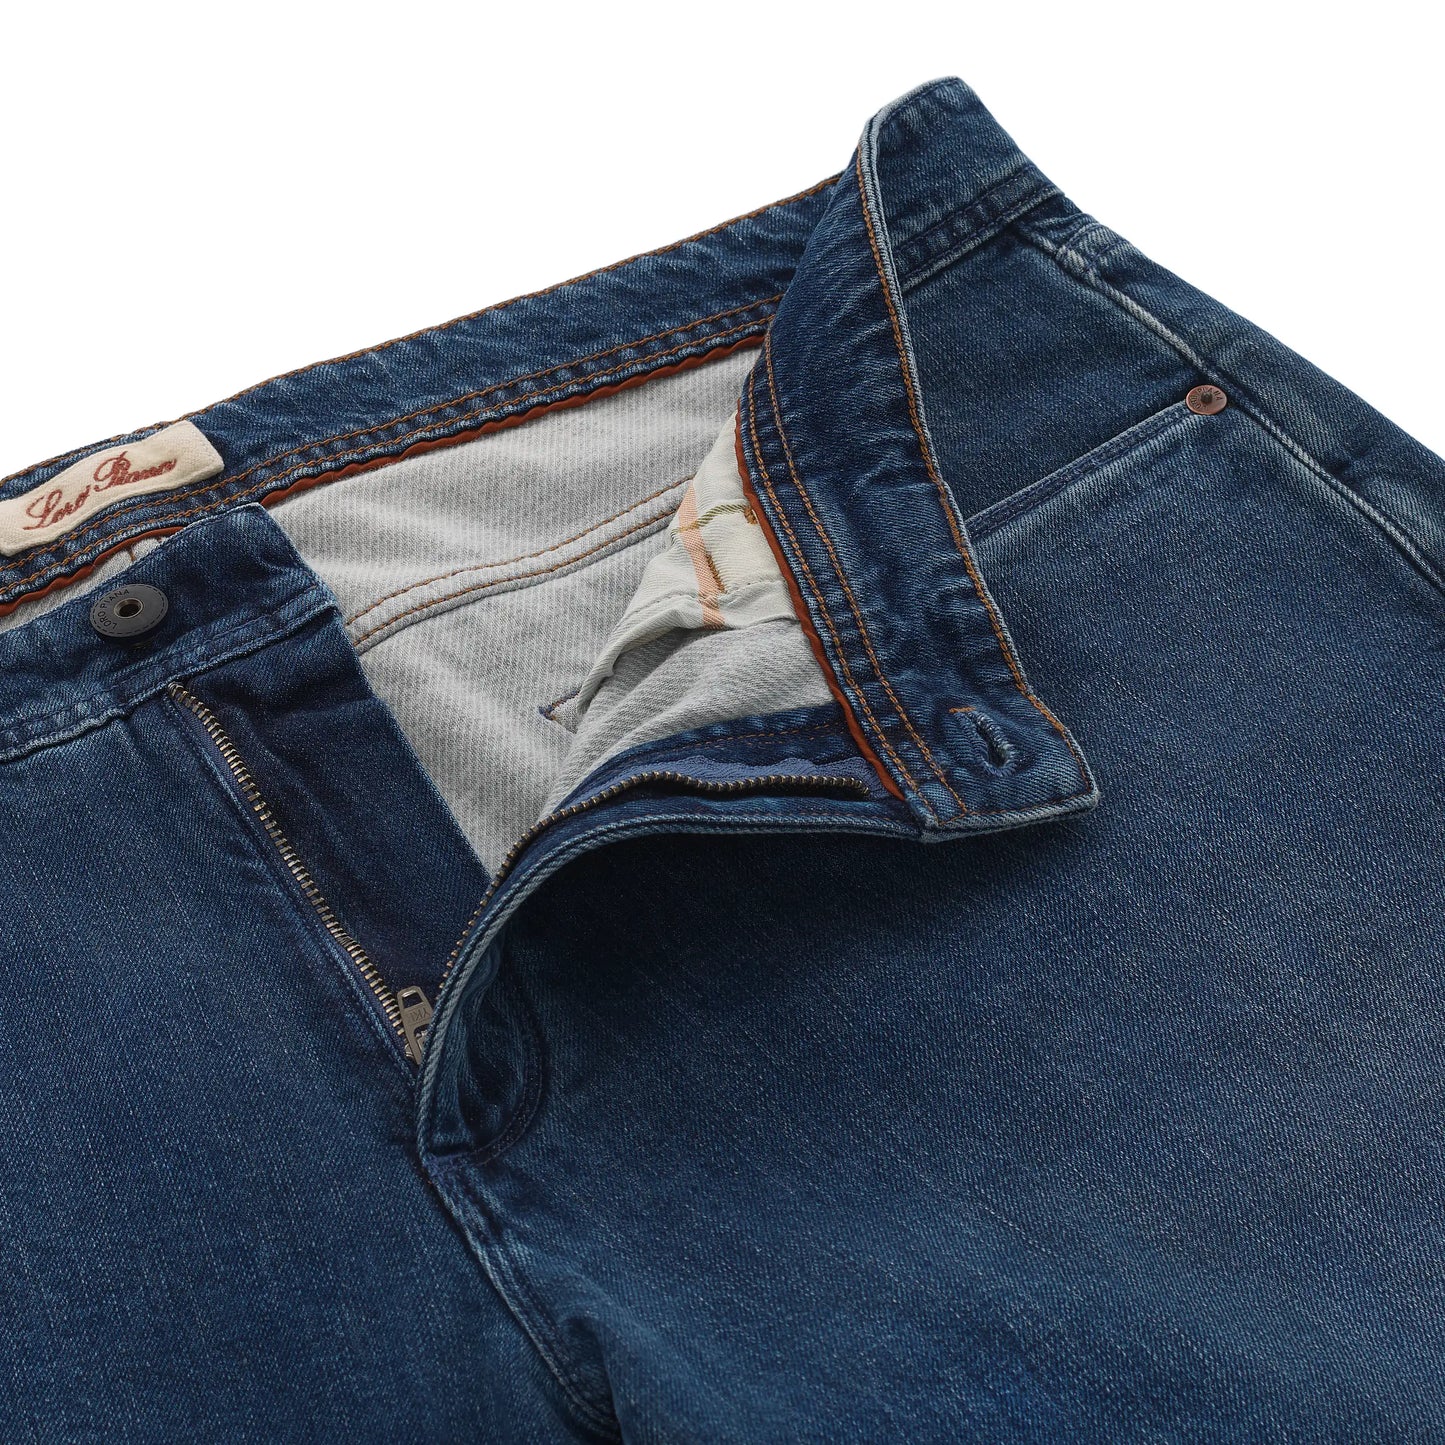 Regular-Fit Jeans with Cotton and Cashmere-Blend Lining in Denim Blue